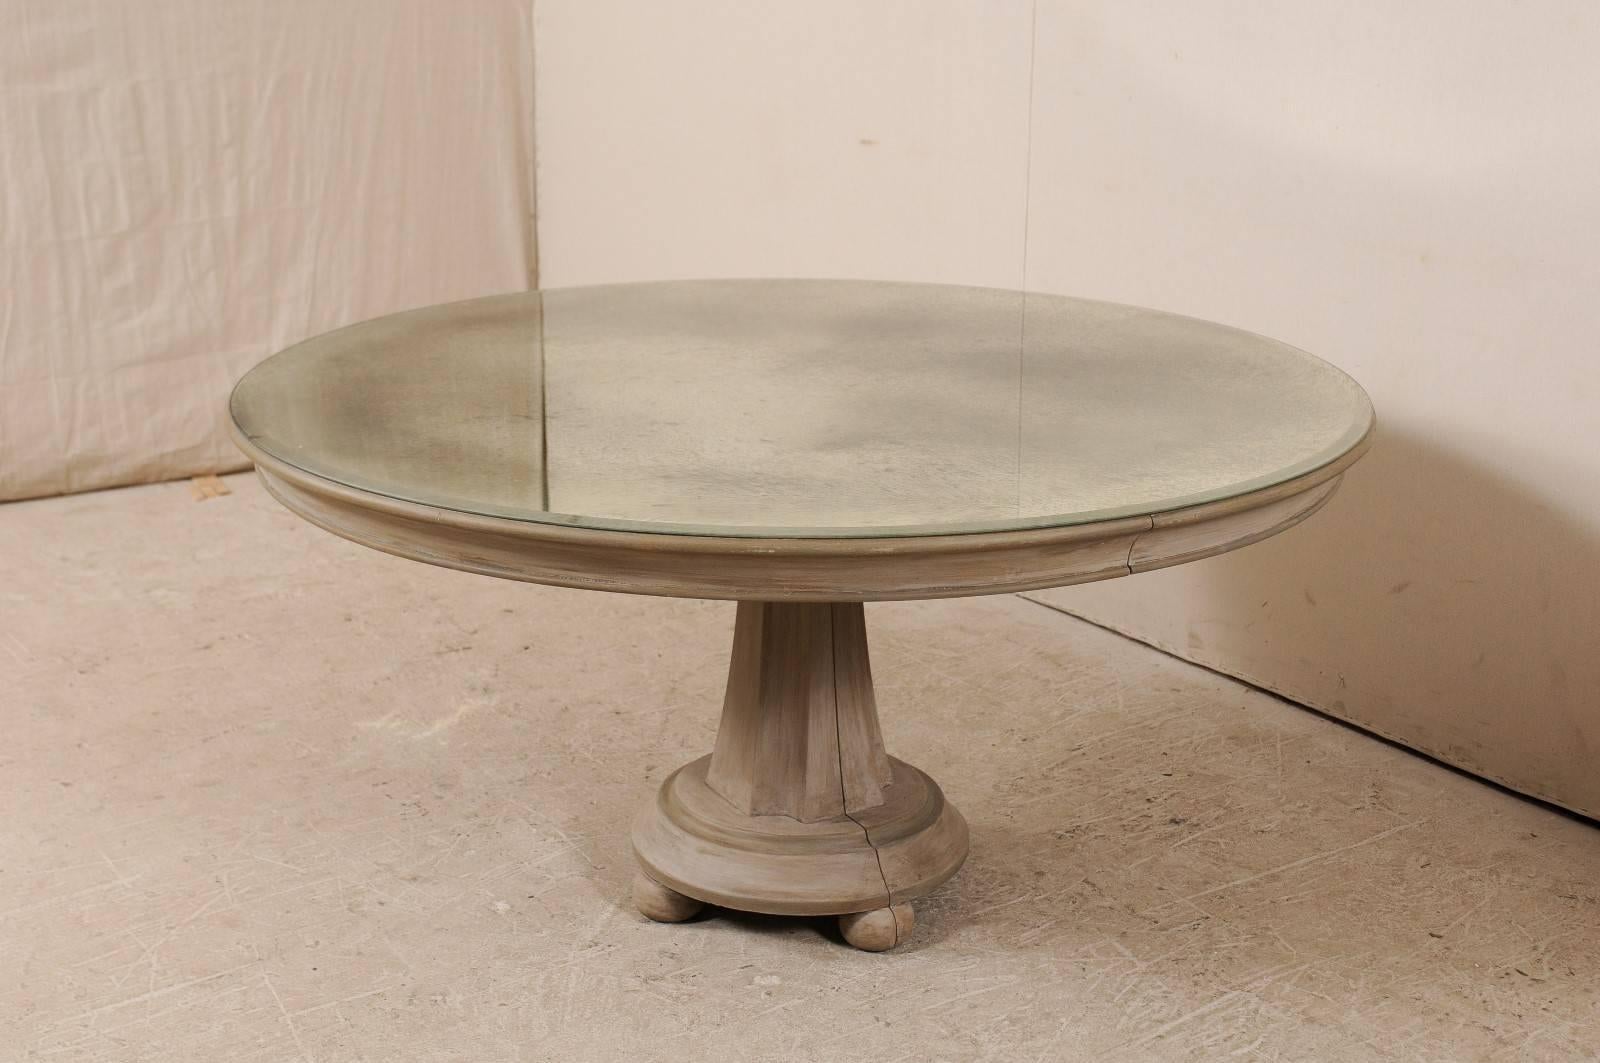 20th Century Vintage Large Round Pedestal Table with Unique Antiqued Mirrored Top